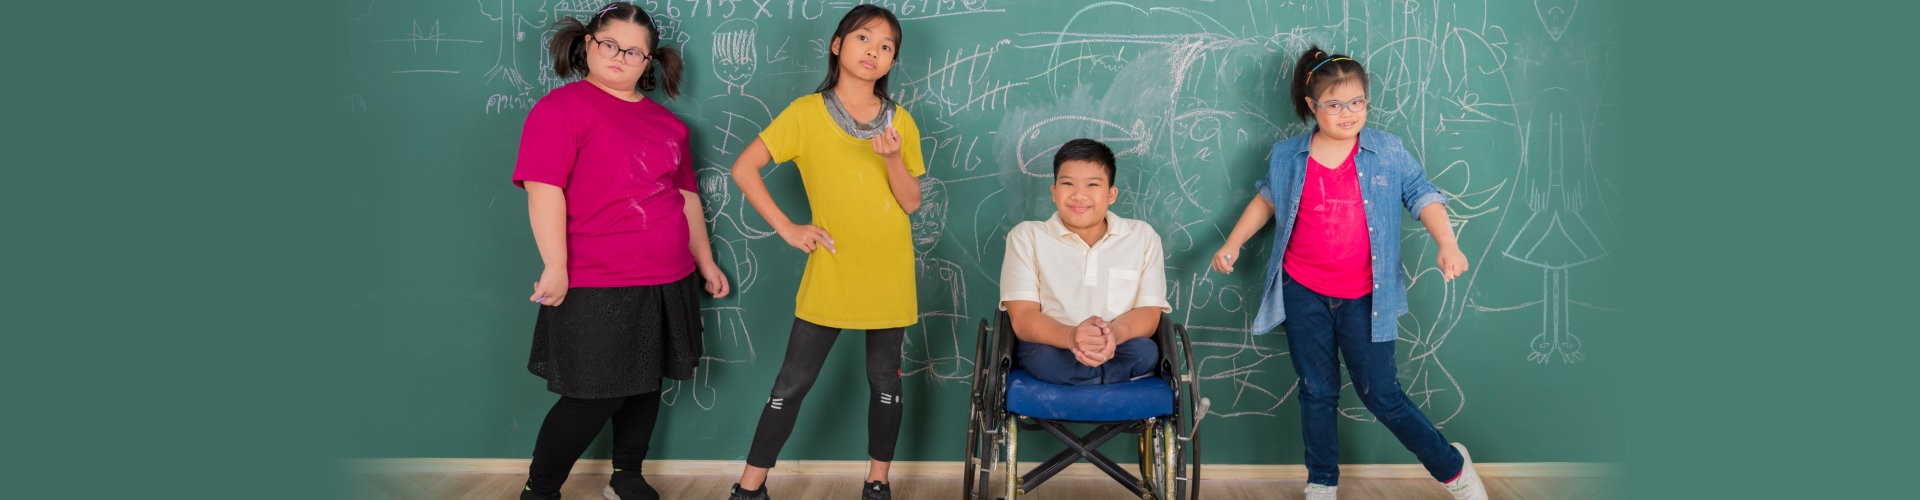 Portrait group of young disabled student standing in front of chalkboard